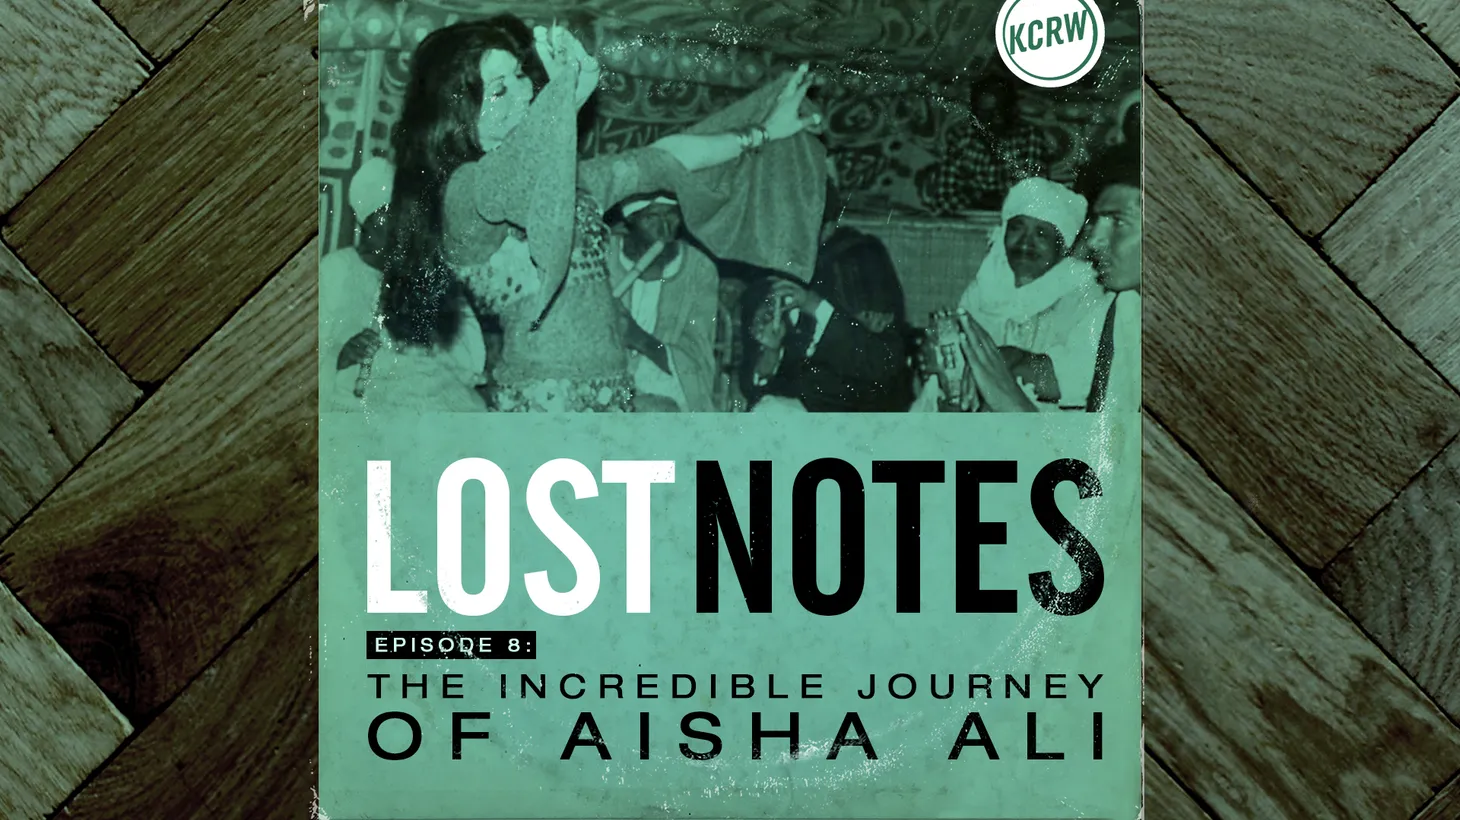 In the wake of the swinging ‘60s, a young woman named Aisha Ali travels to North Africa in search of her roots. There, she single-handedly documents hours and hours of music and film from Algeria, Libya, Tunisia, Morocco, and Egypt ...